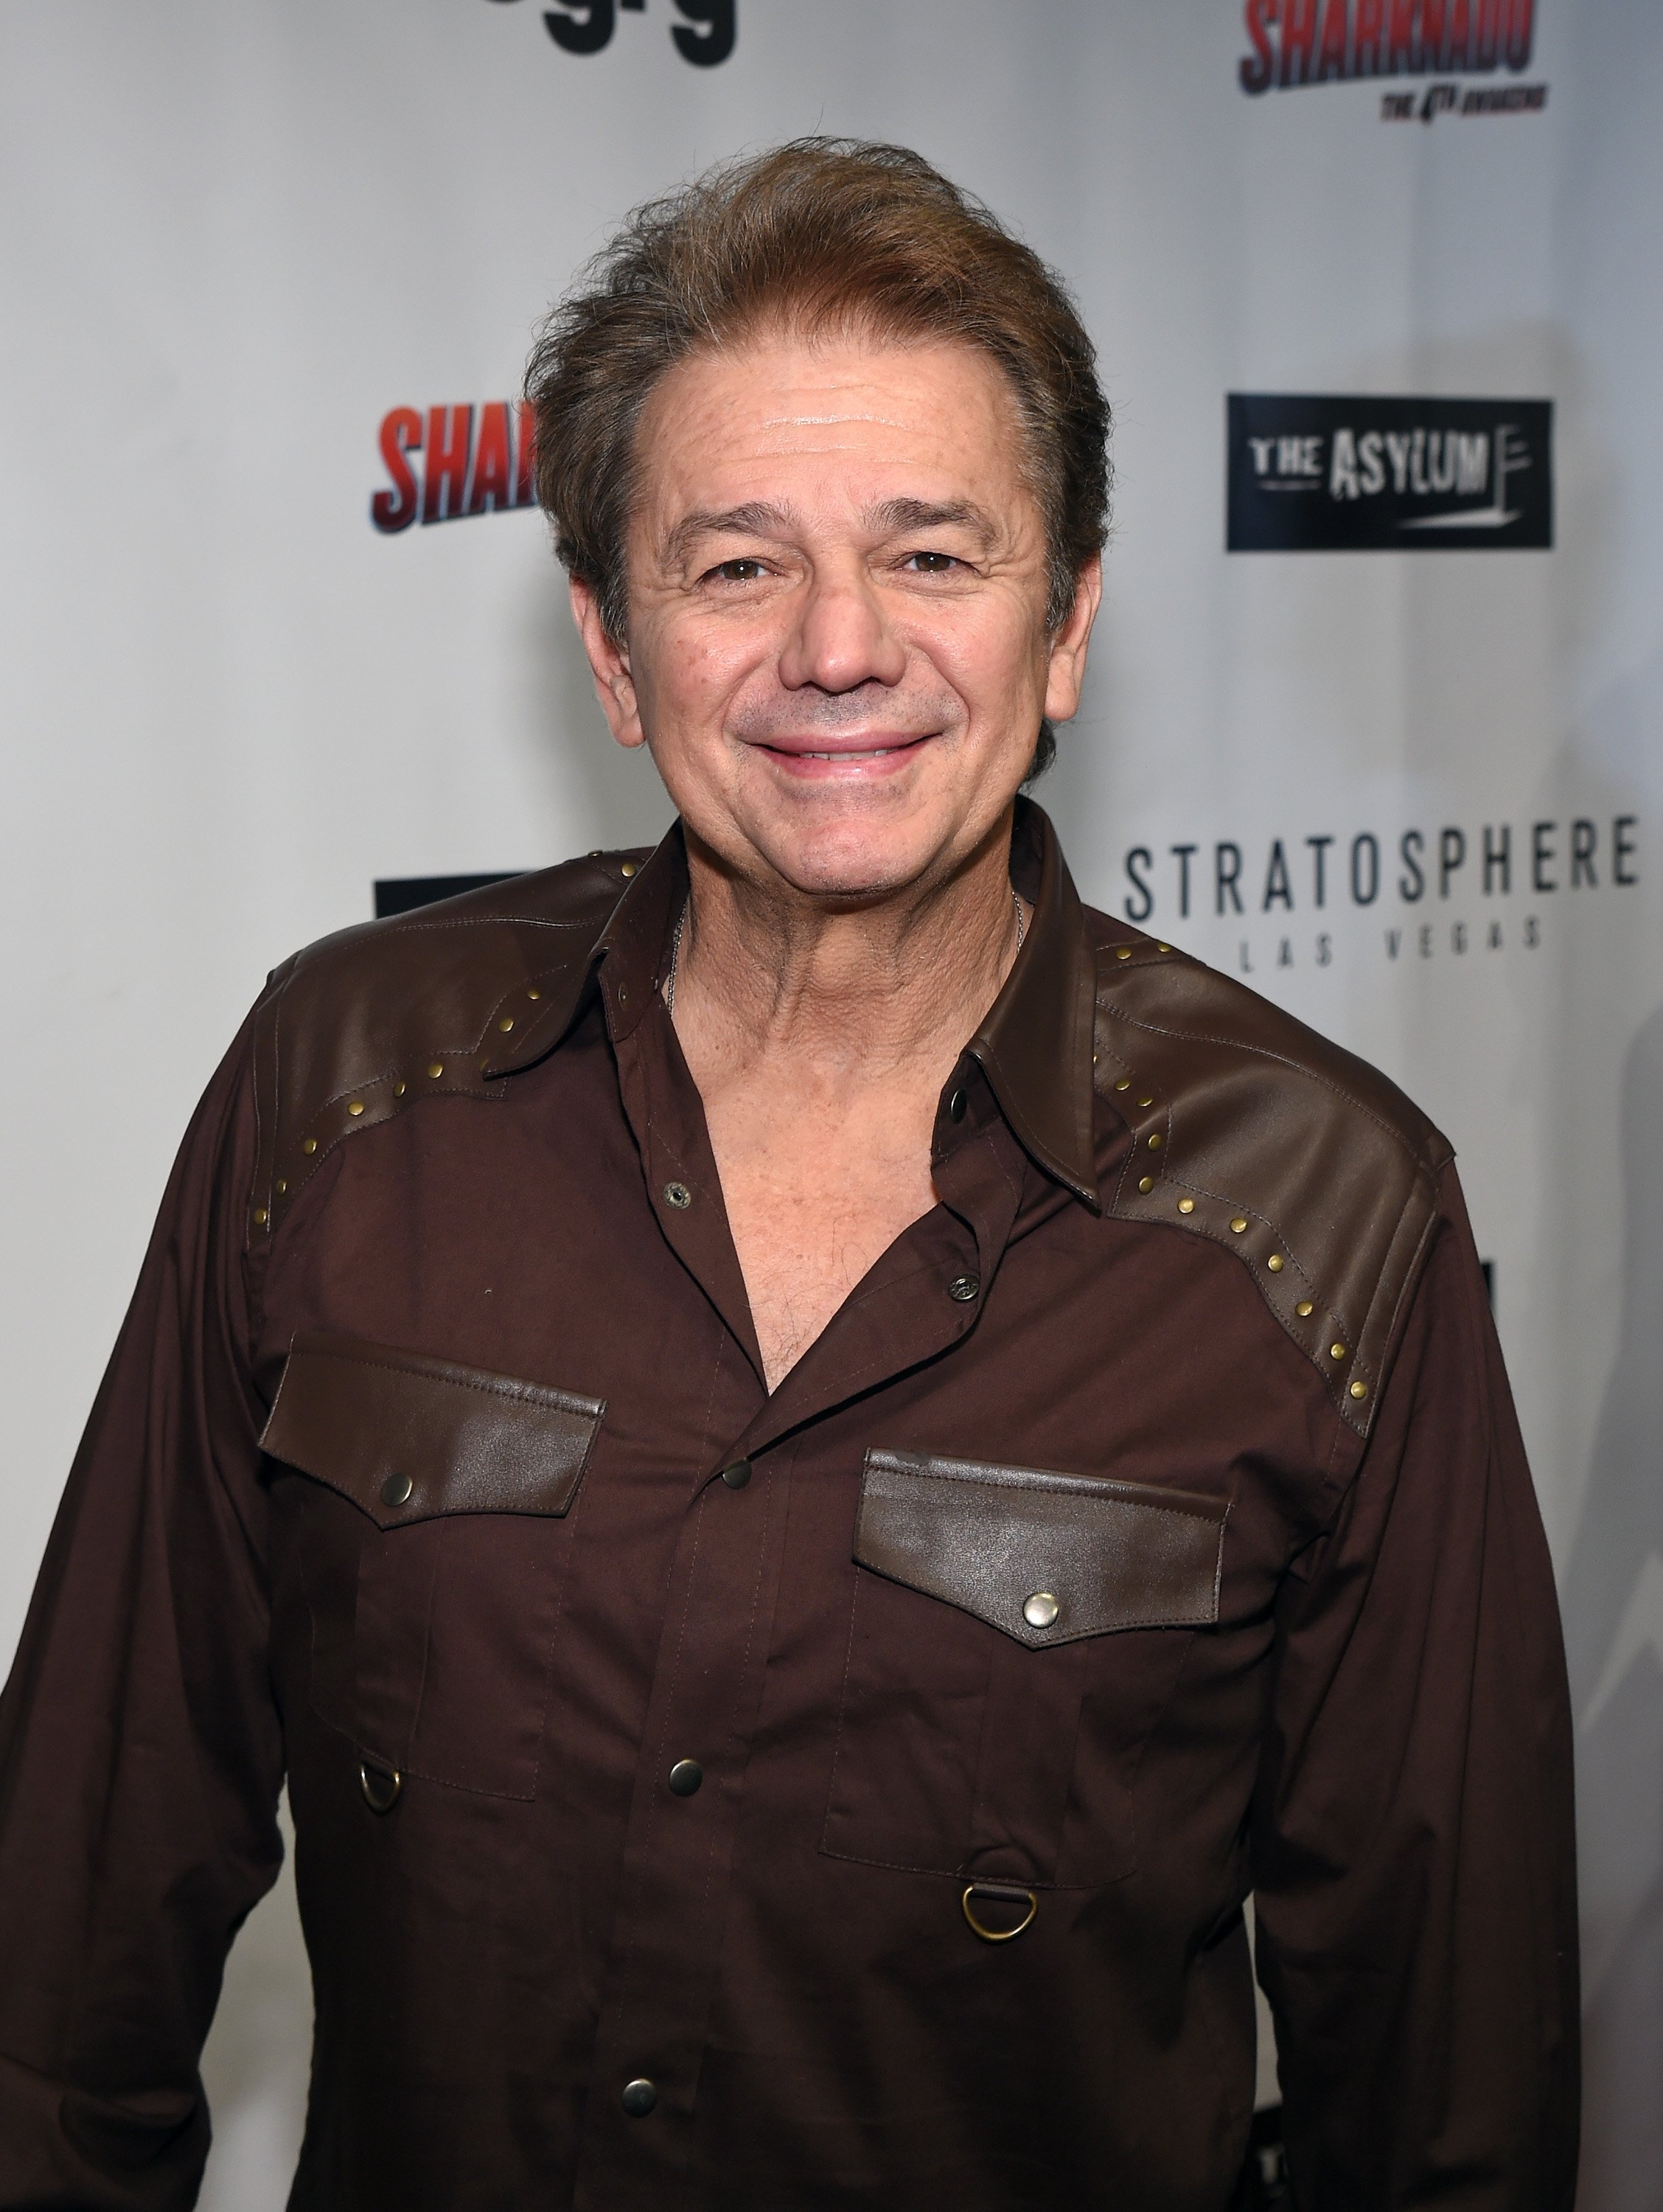 Adrian Zmed attends the premiere of Syfy's "Sharknado: The 4th Awakens" at the Stratosphere Casino Hotel on July 31, 2016, in Las Vegas, Nevada. | Source: Getty Images.